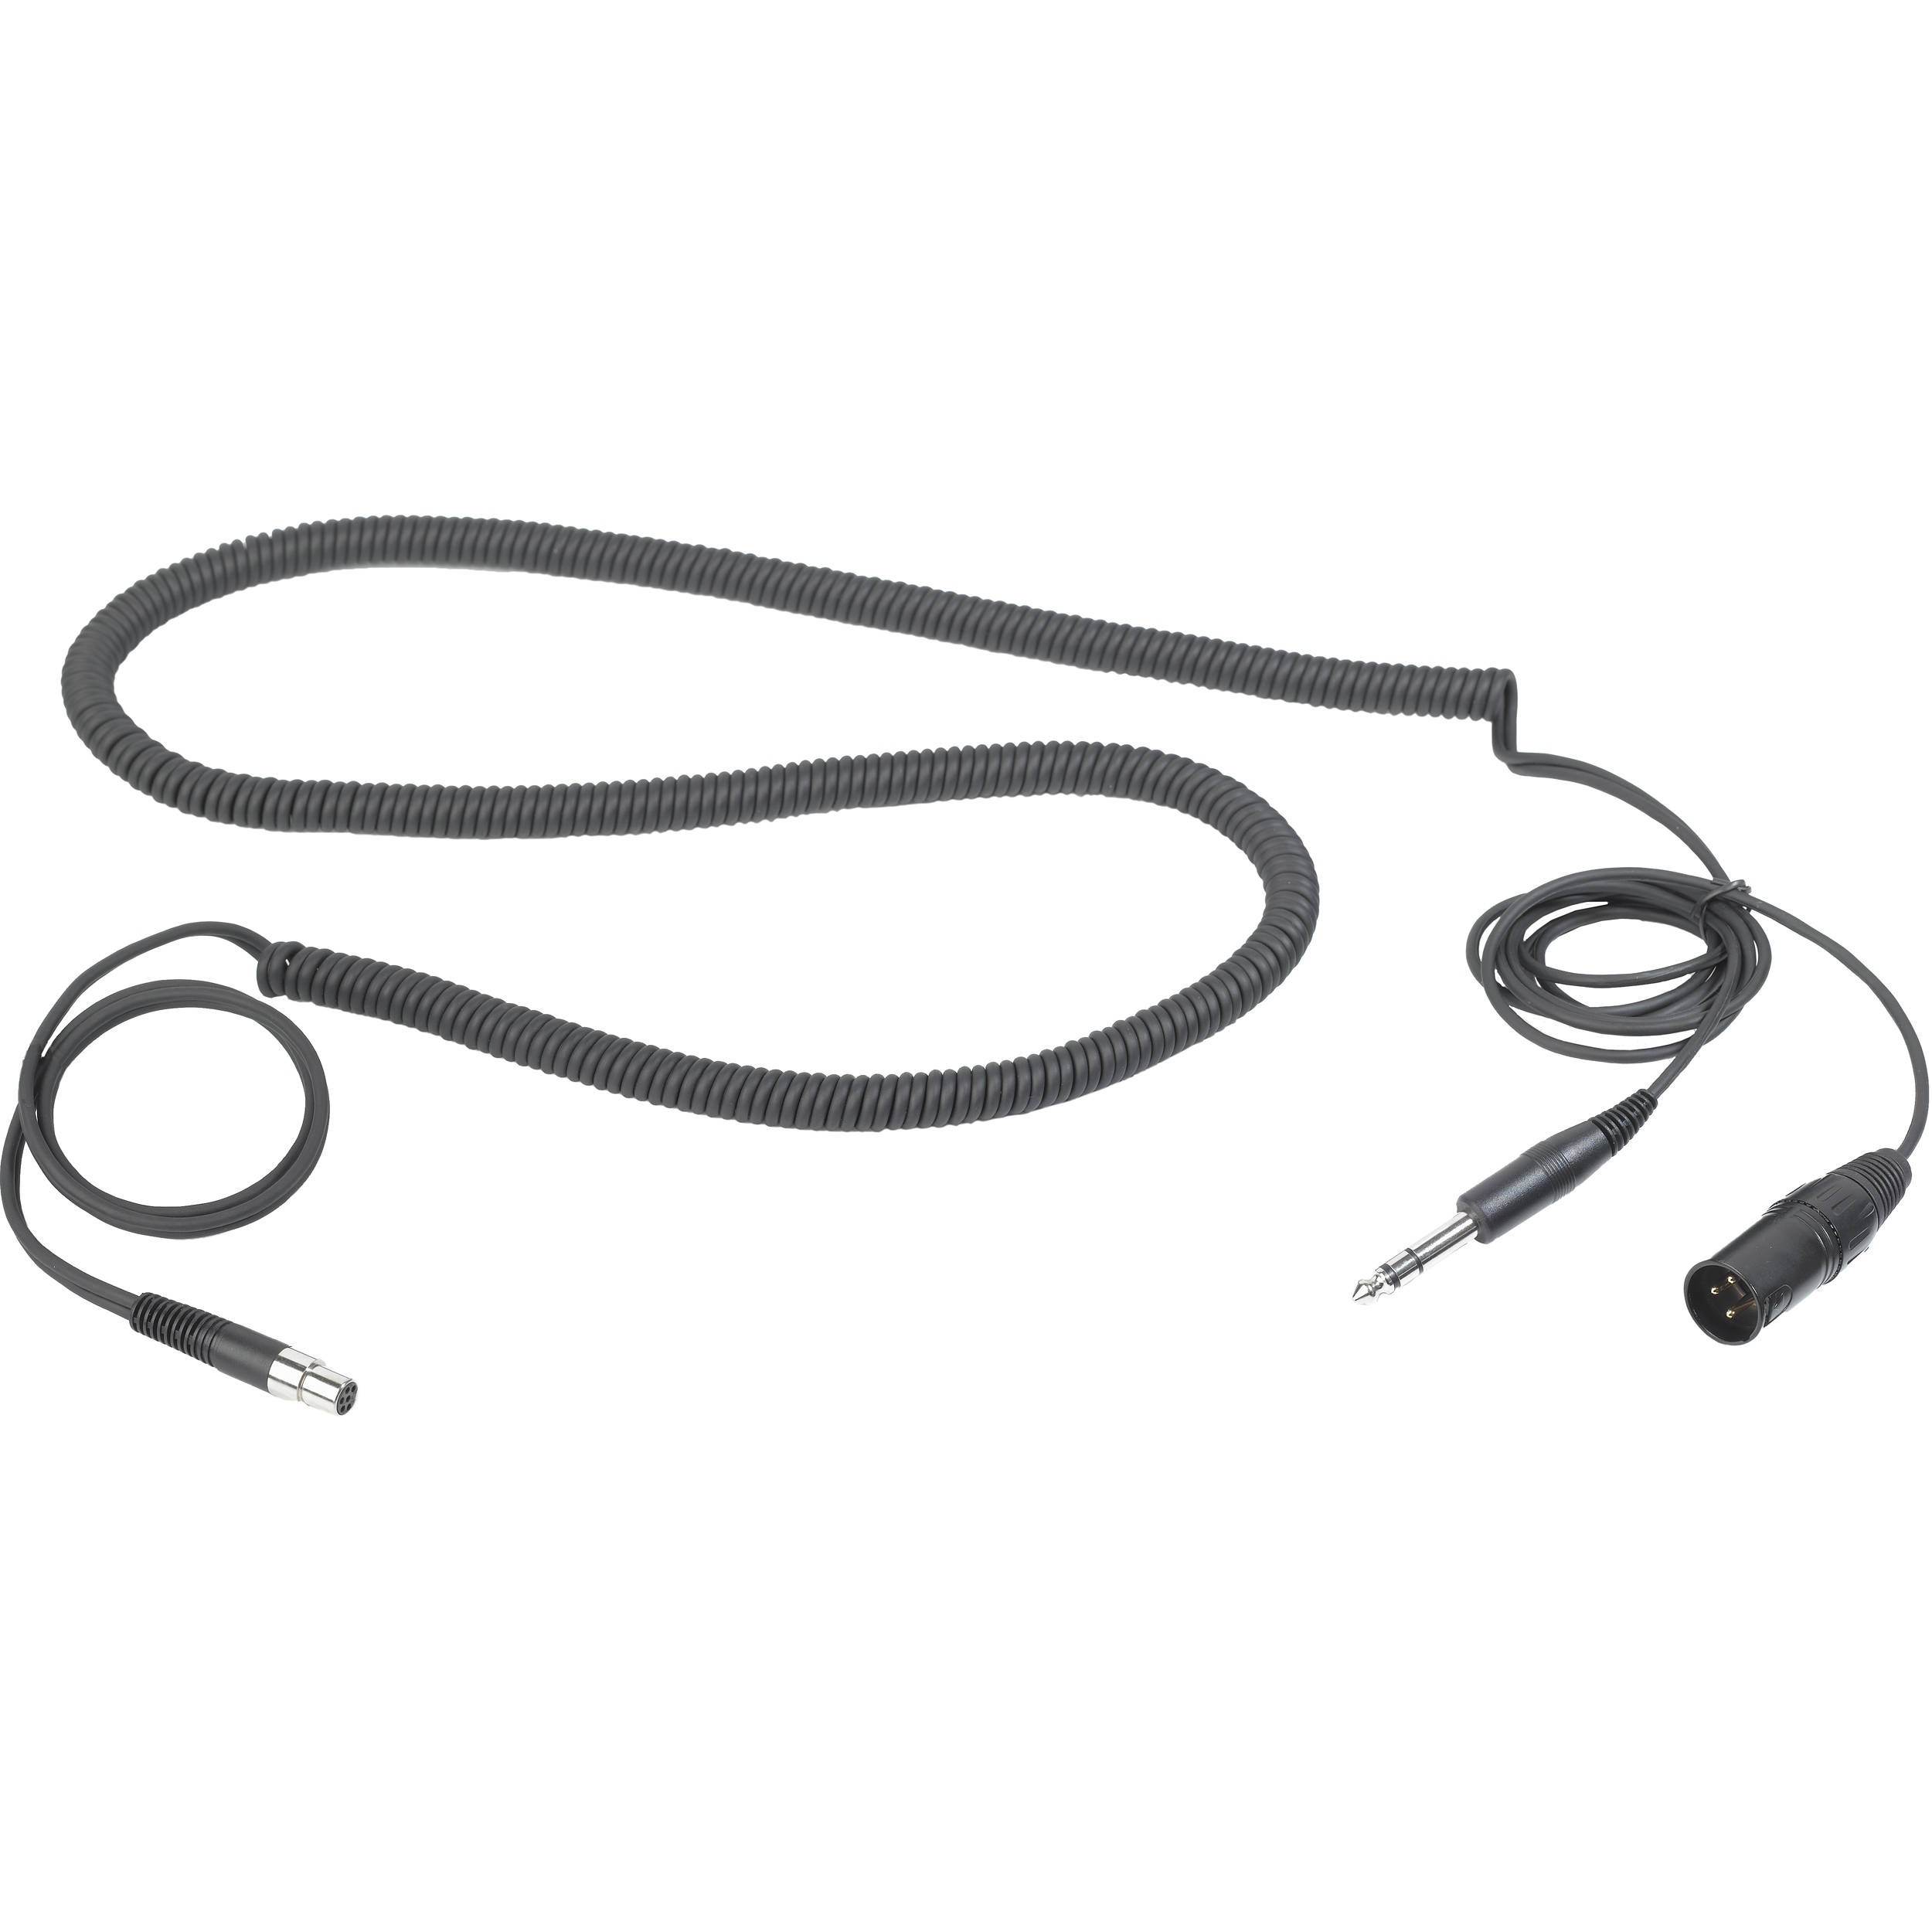 AKG MK HS STUDIO D Headset Cable for Studio and Moderators with 3-Pin XLR & 1/4" Stereo Connectors